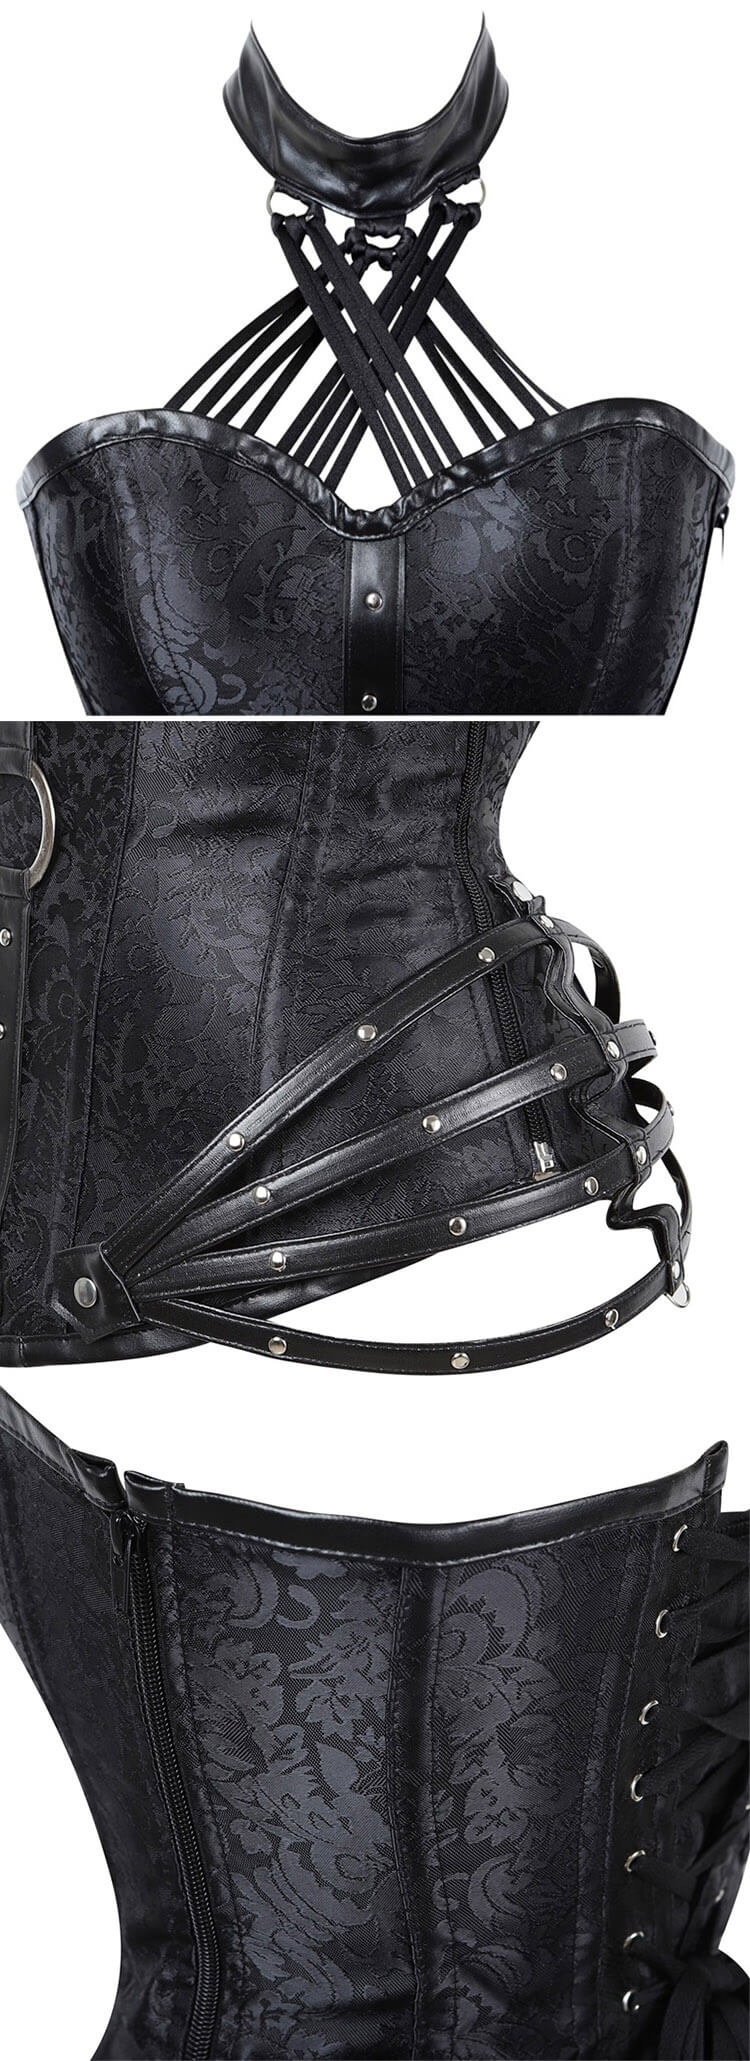 Special And Sexy Gothic Style Corset With Halter Neck Corset With Leather Decorations And Lacing